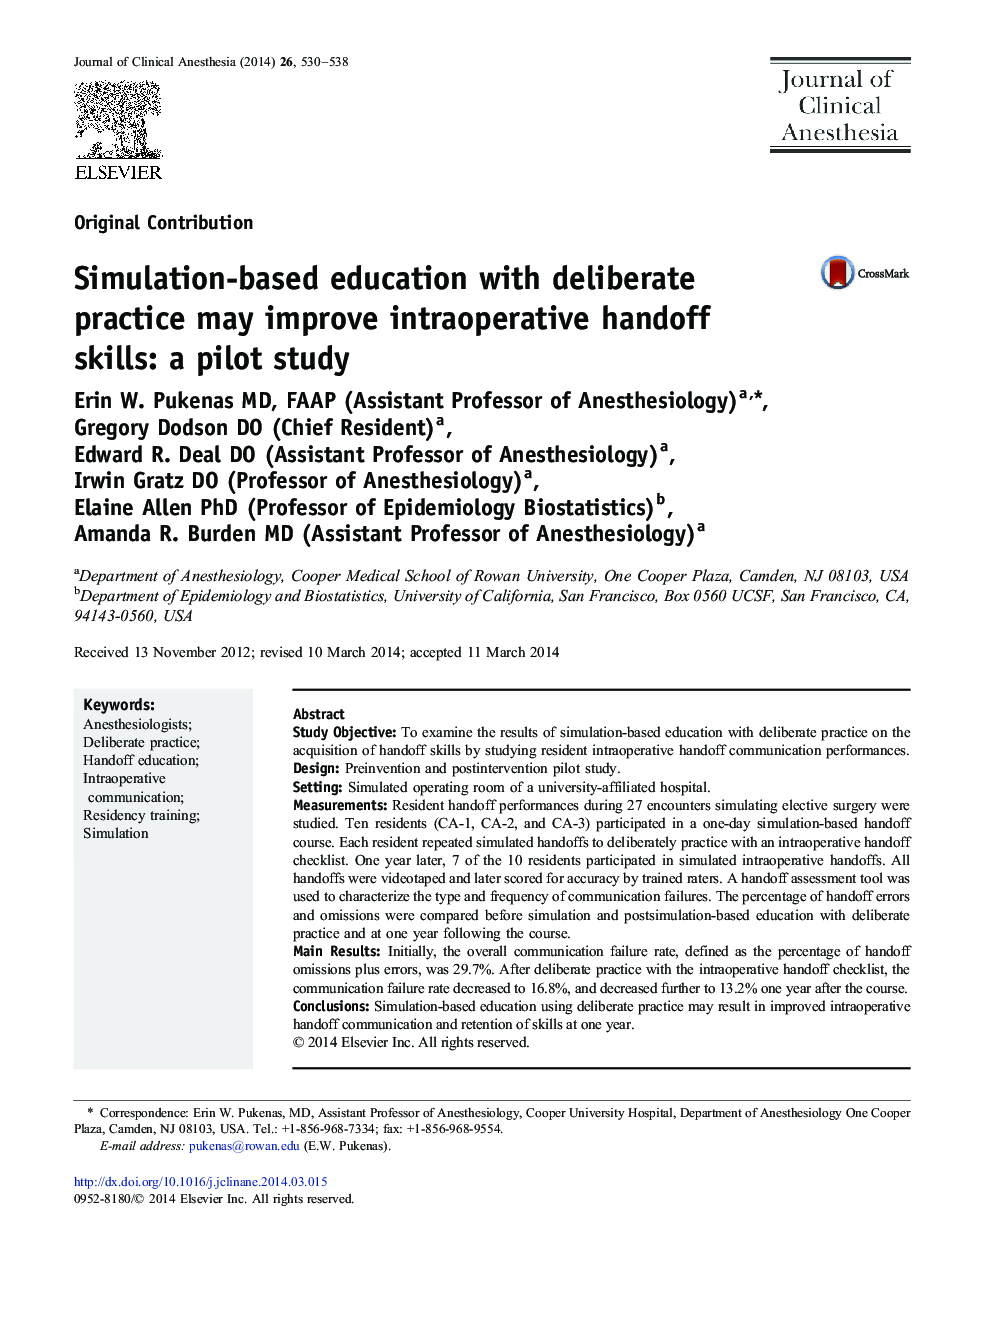 Simulation-based education with deliberate practice may improve intraoperative handoff skills: a pilot study